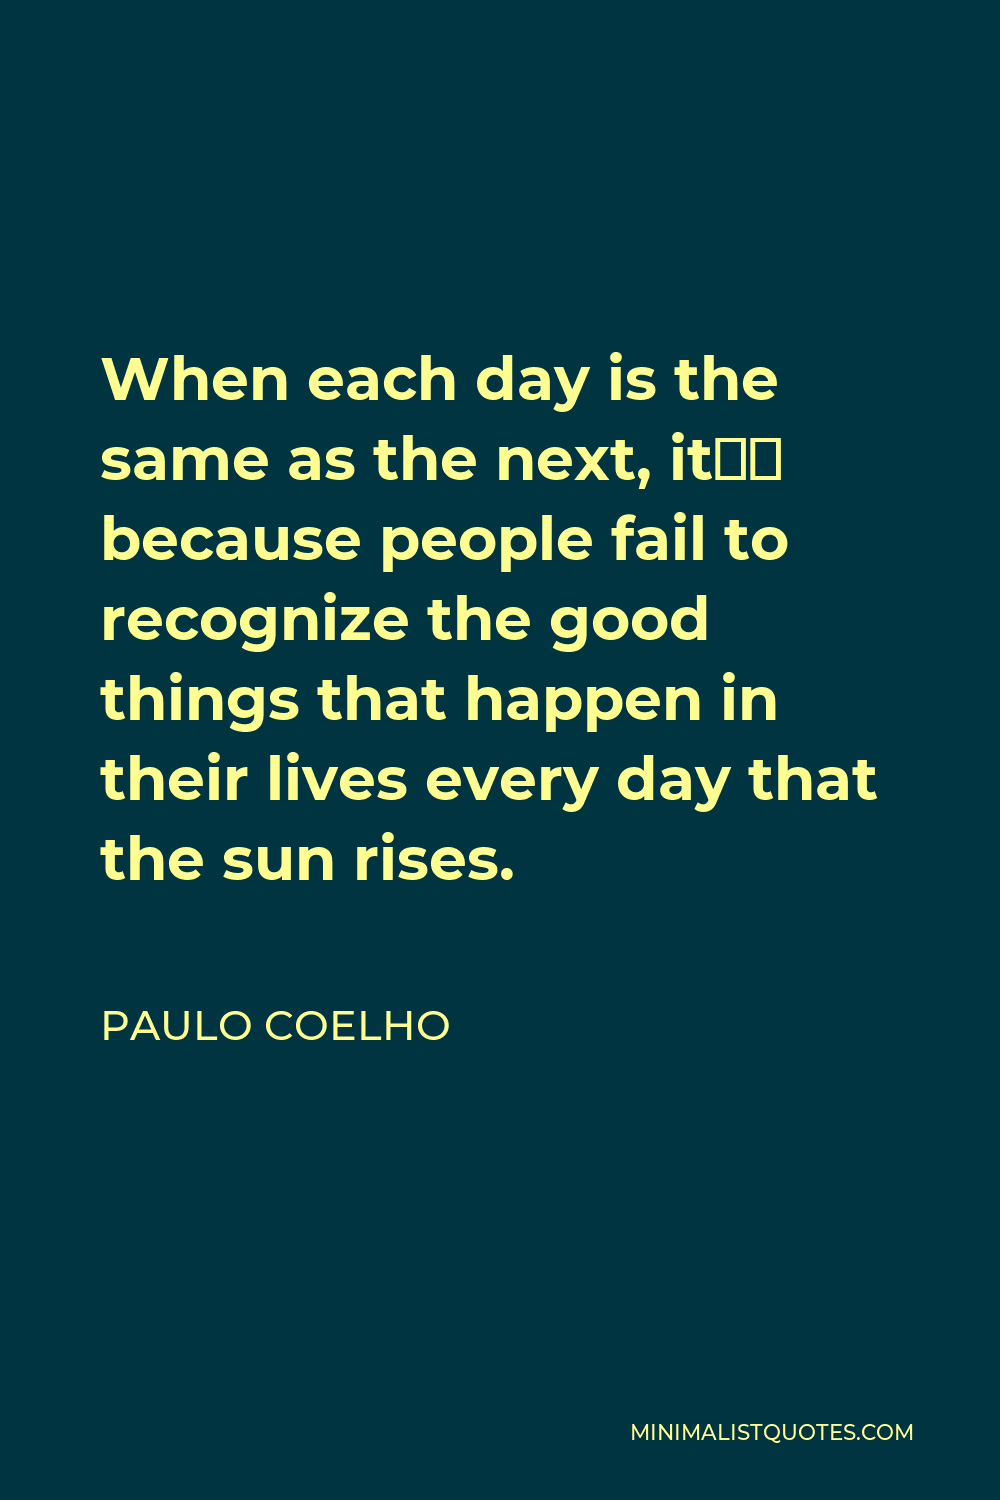 Paulo Coelho Quote - When each day is the same as the next, it’s because people fail to recognize the good things that happen in their lives every day that the sun rises.